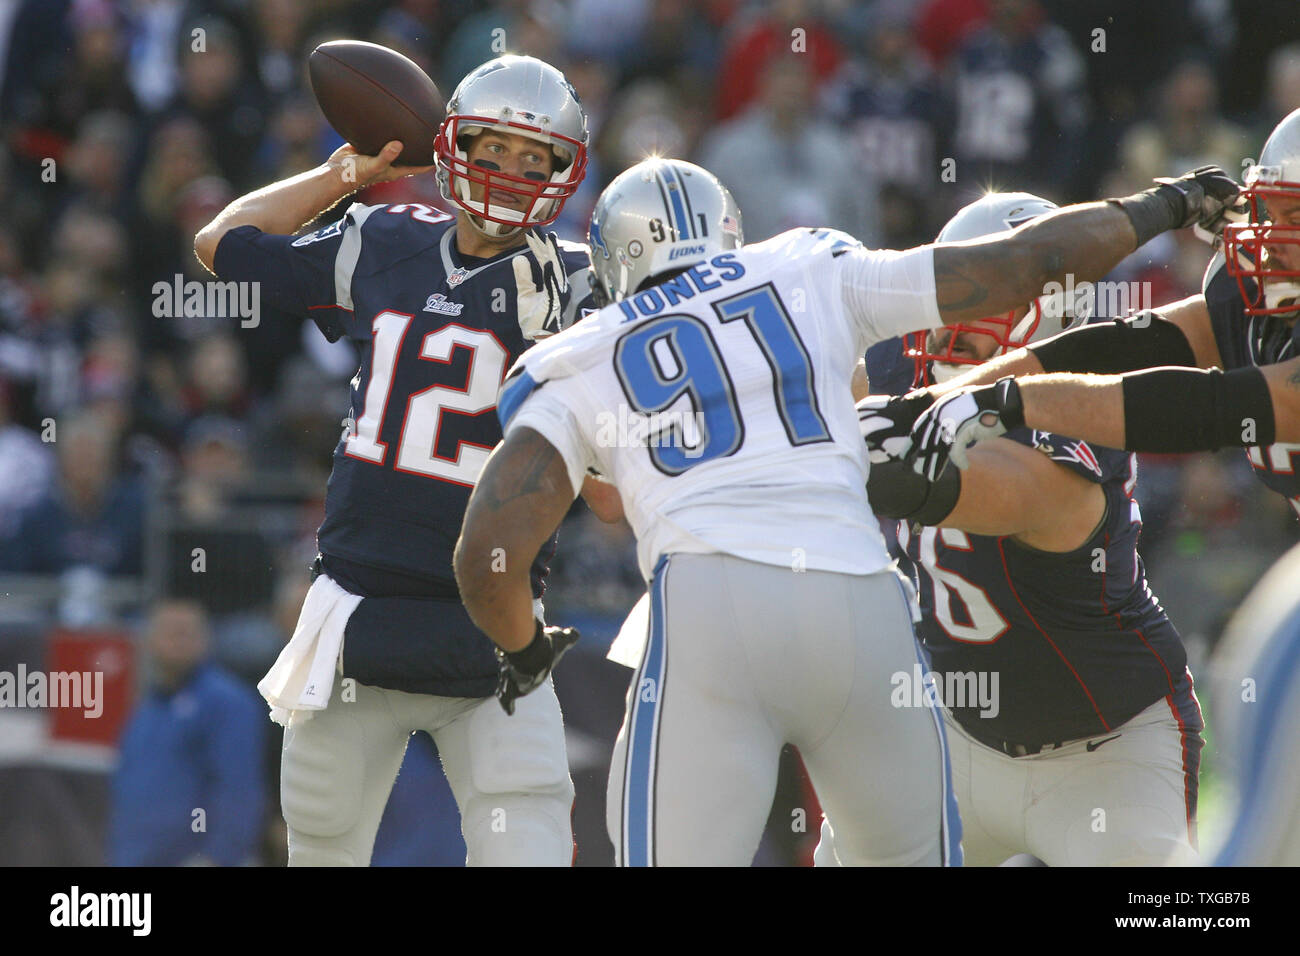 New England Patriots quarterback Tom Brady (12) drops back for a pass in the first half against the Detroit Lions at Gillette Stadium in Foxborough, Massachusetts on November 23, 2014.     UPI/Matthew Healey Stock Photo